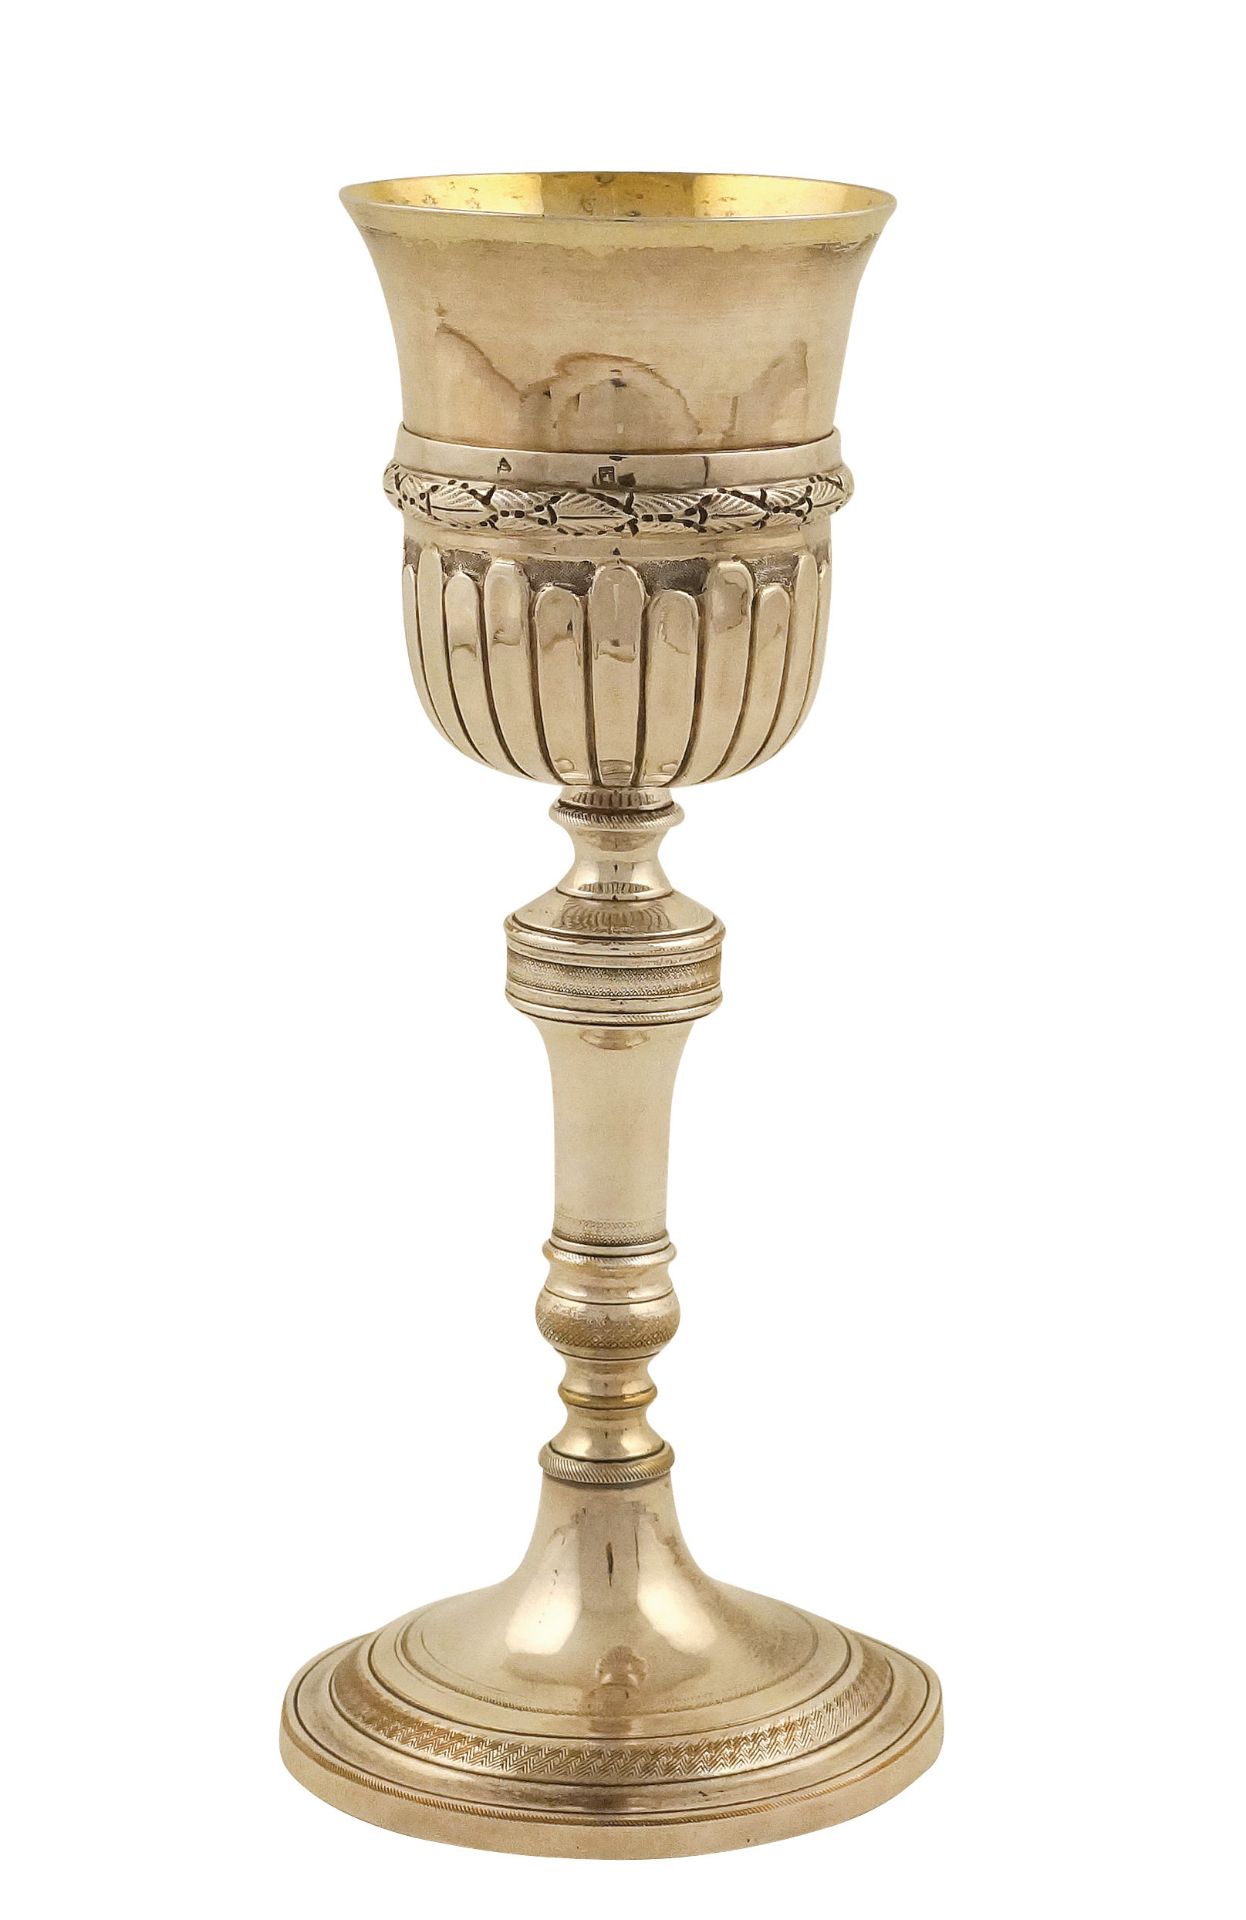 An Italian silver and metal eucharistic chalice